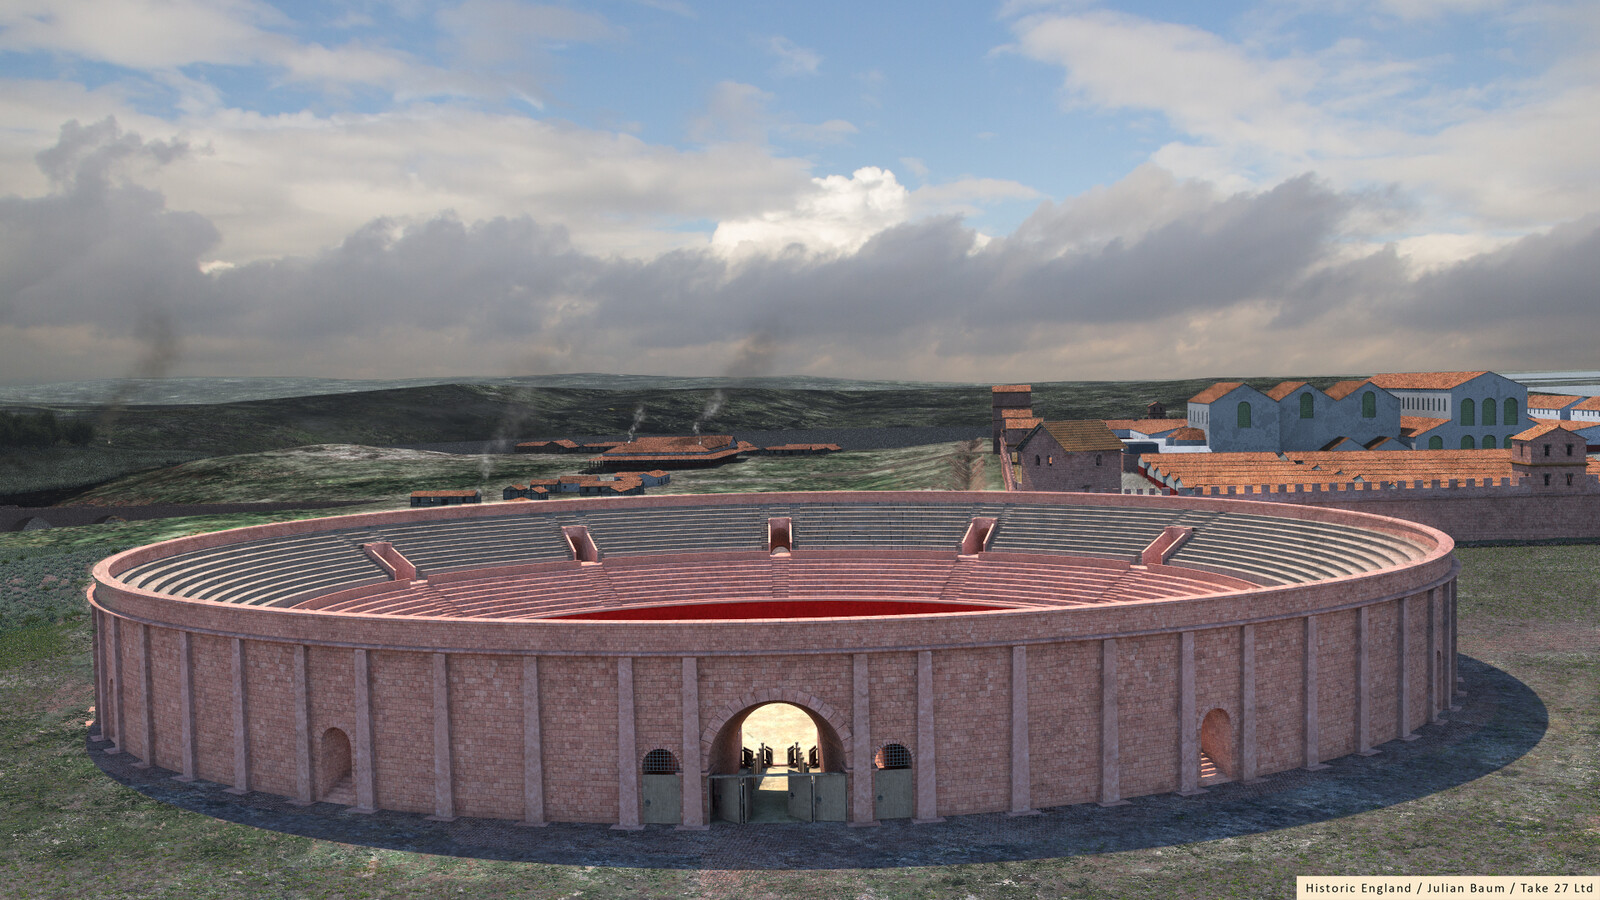 Chester's Roman ampitheatre, standing at the outer South East corner of the fortress.